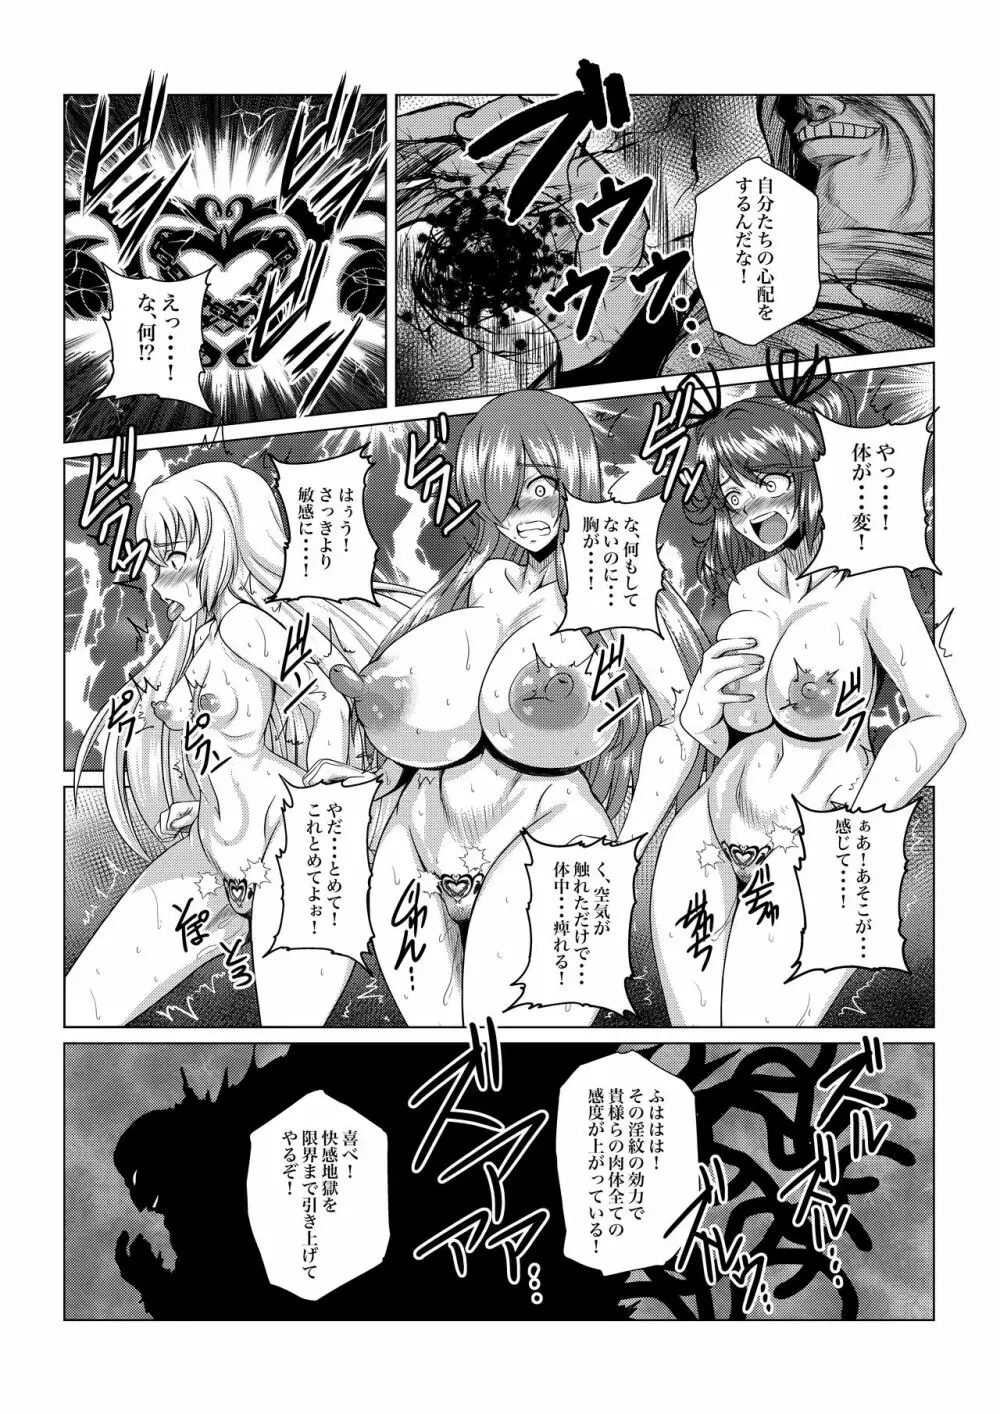 Tales Of DarkSide〜三散華〜 - page10